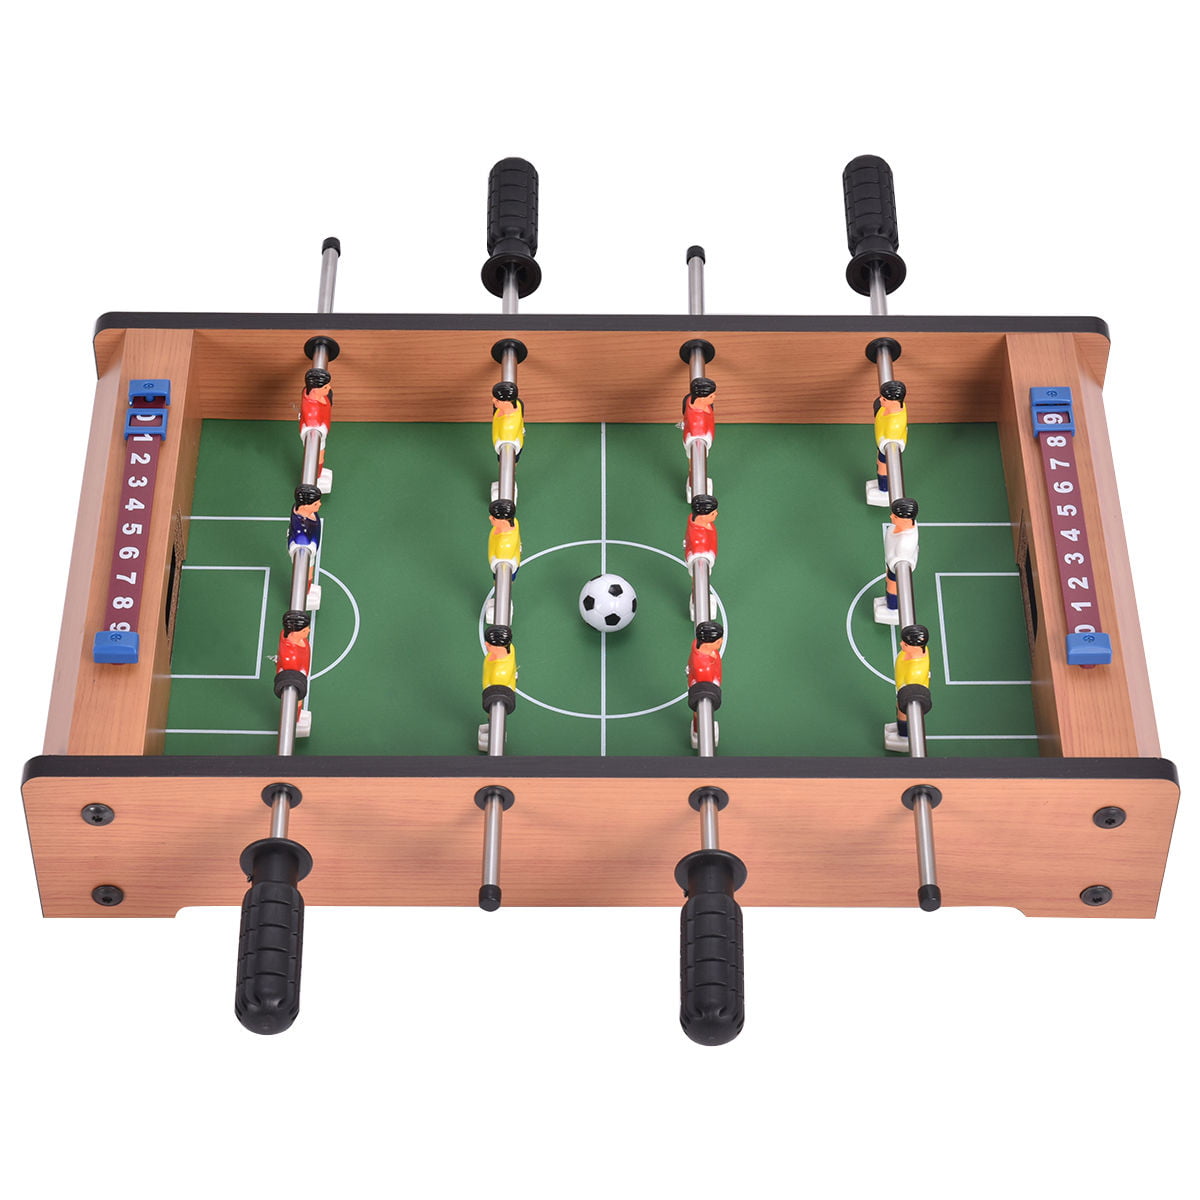 CIGOCIVI 20” Foosball Table Games for Family Game Night with Kids Portable Mini Tabletop Soccer Games for Adults